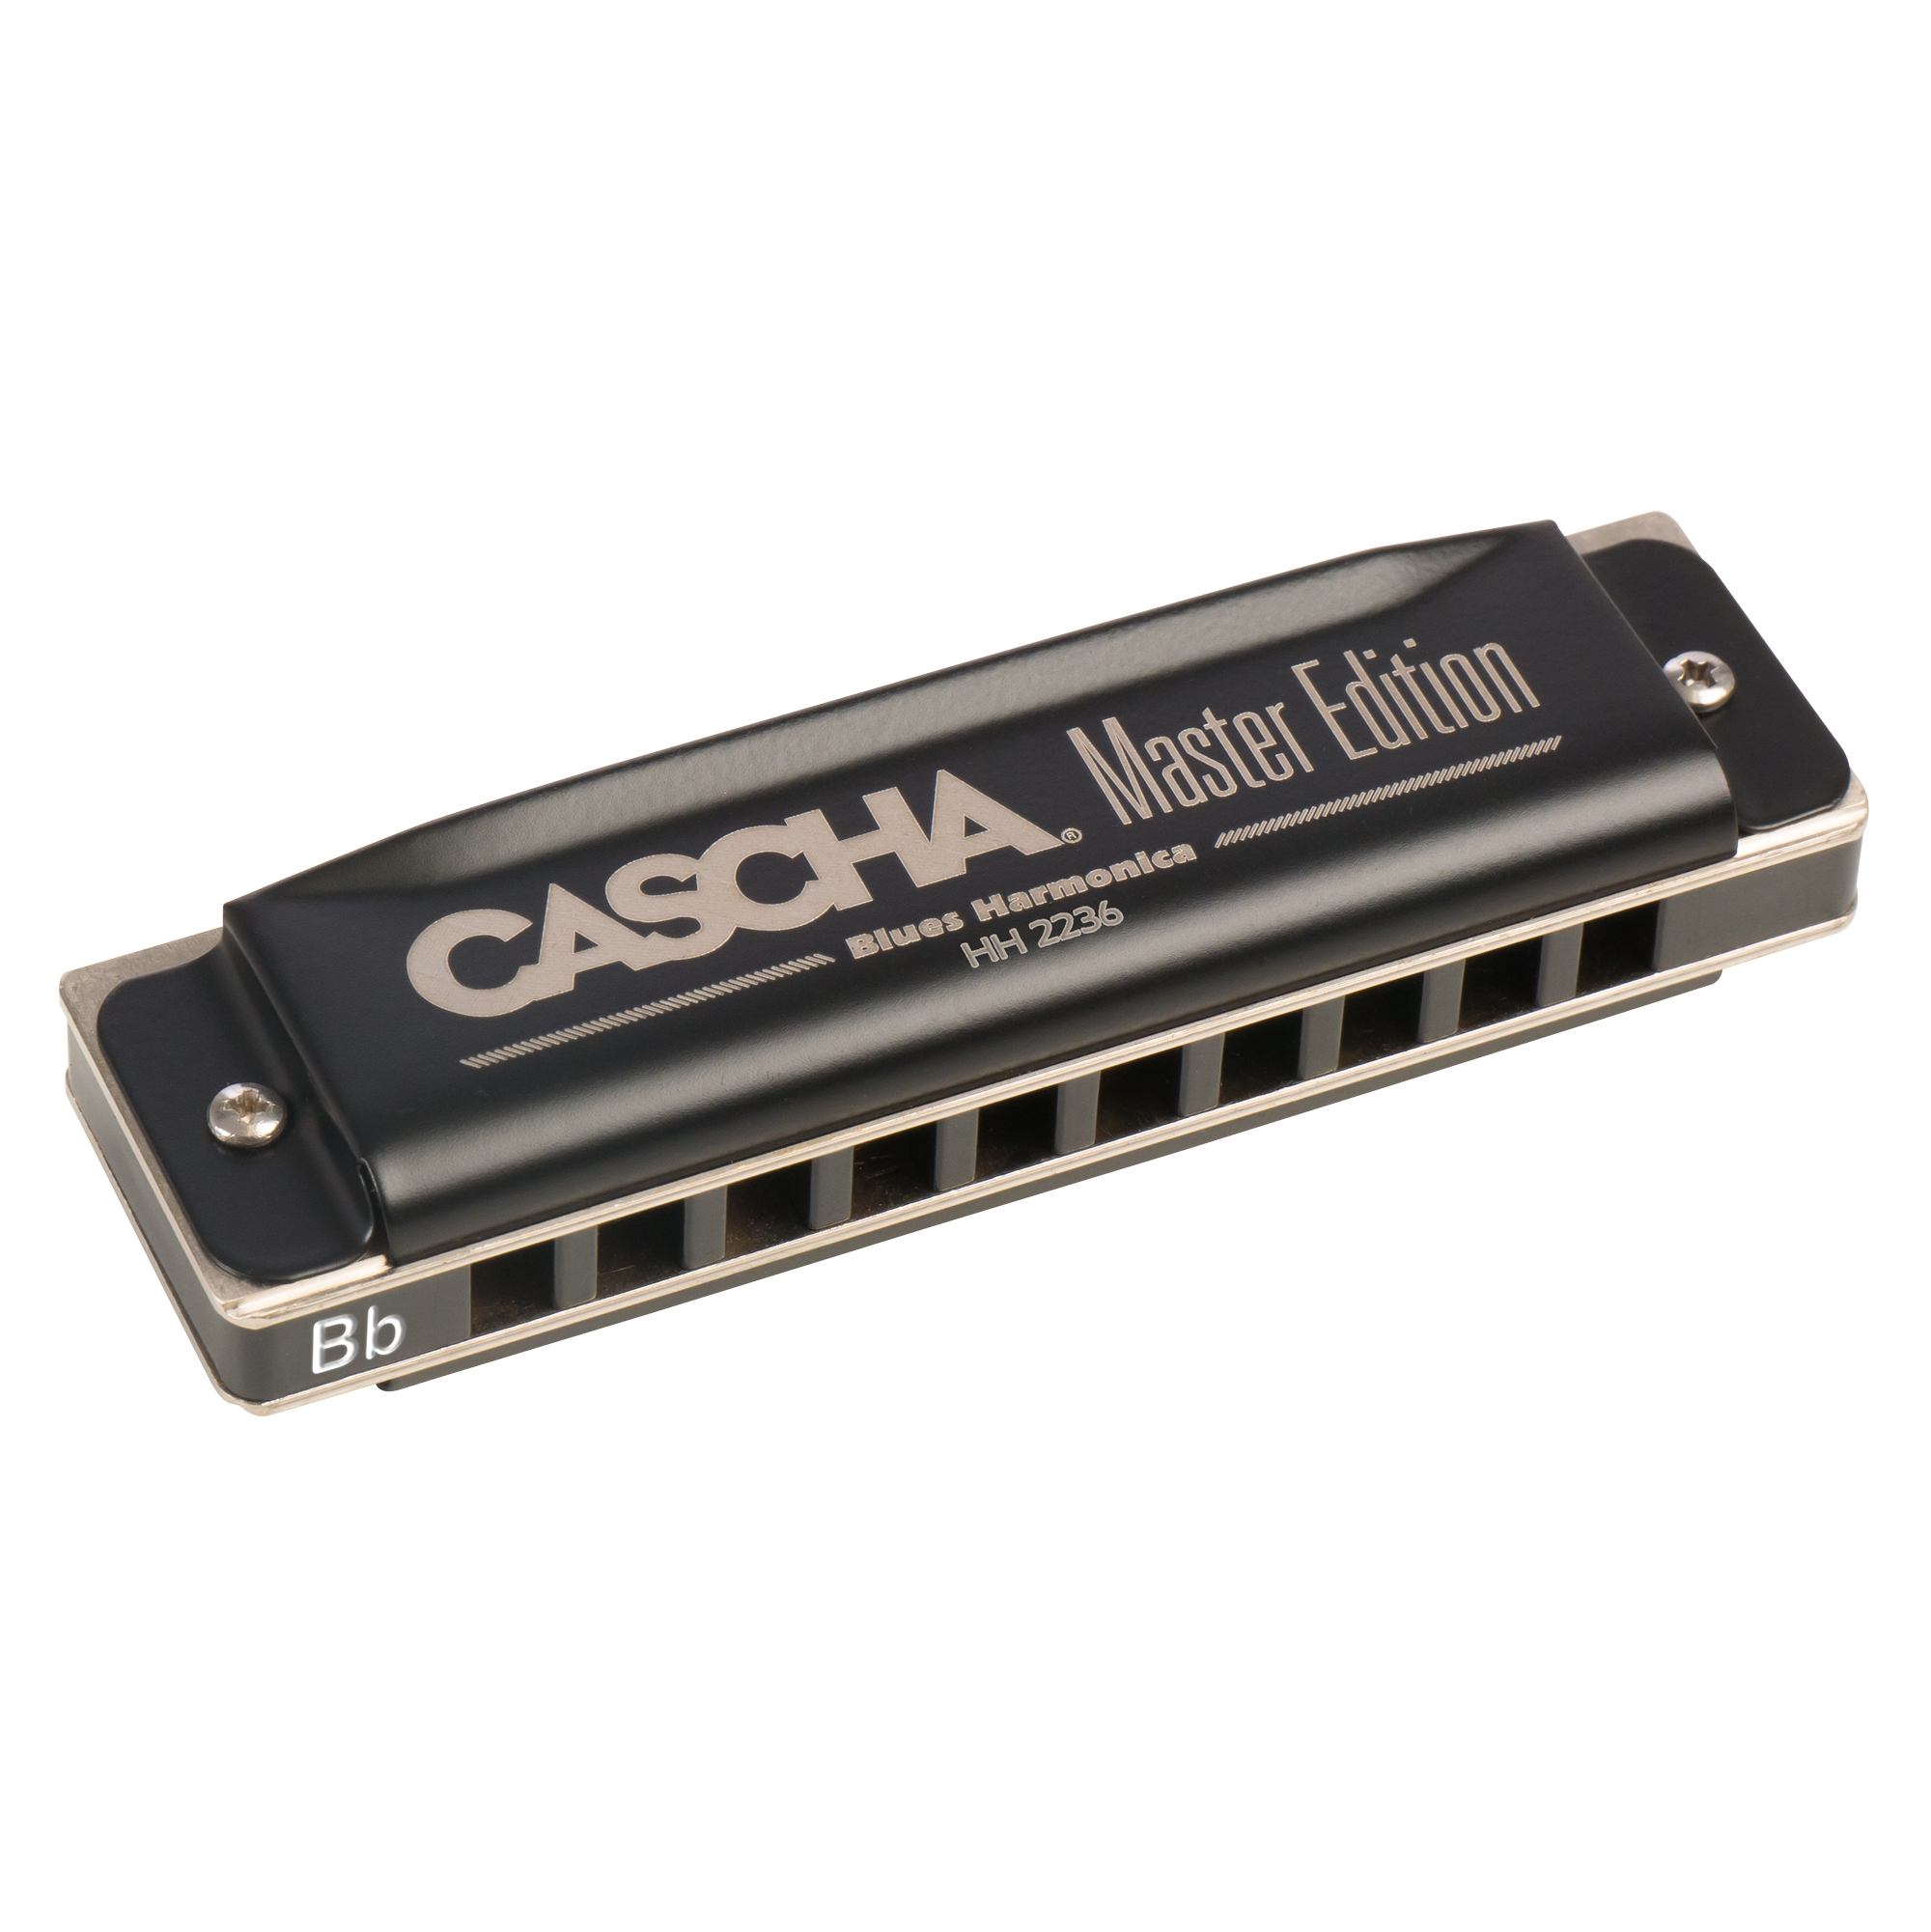 CASCHA Master Edition Blues Harmonica blues organ high-quality harmonica in A-major with soft case and care cloth